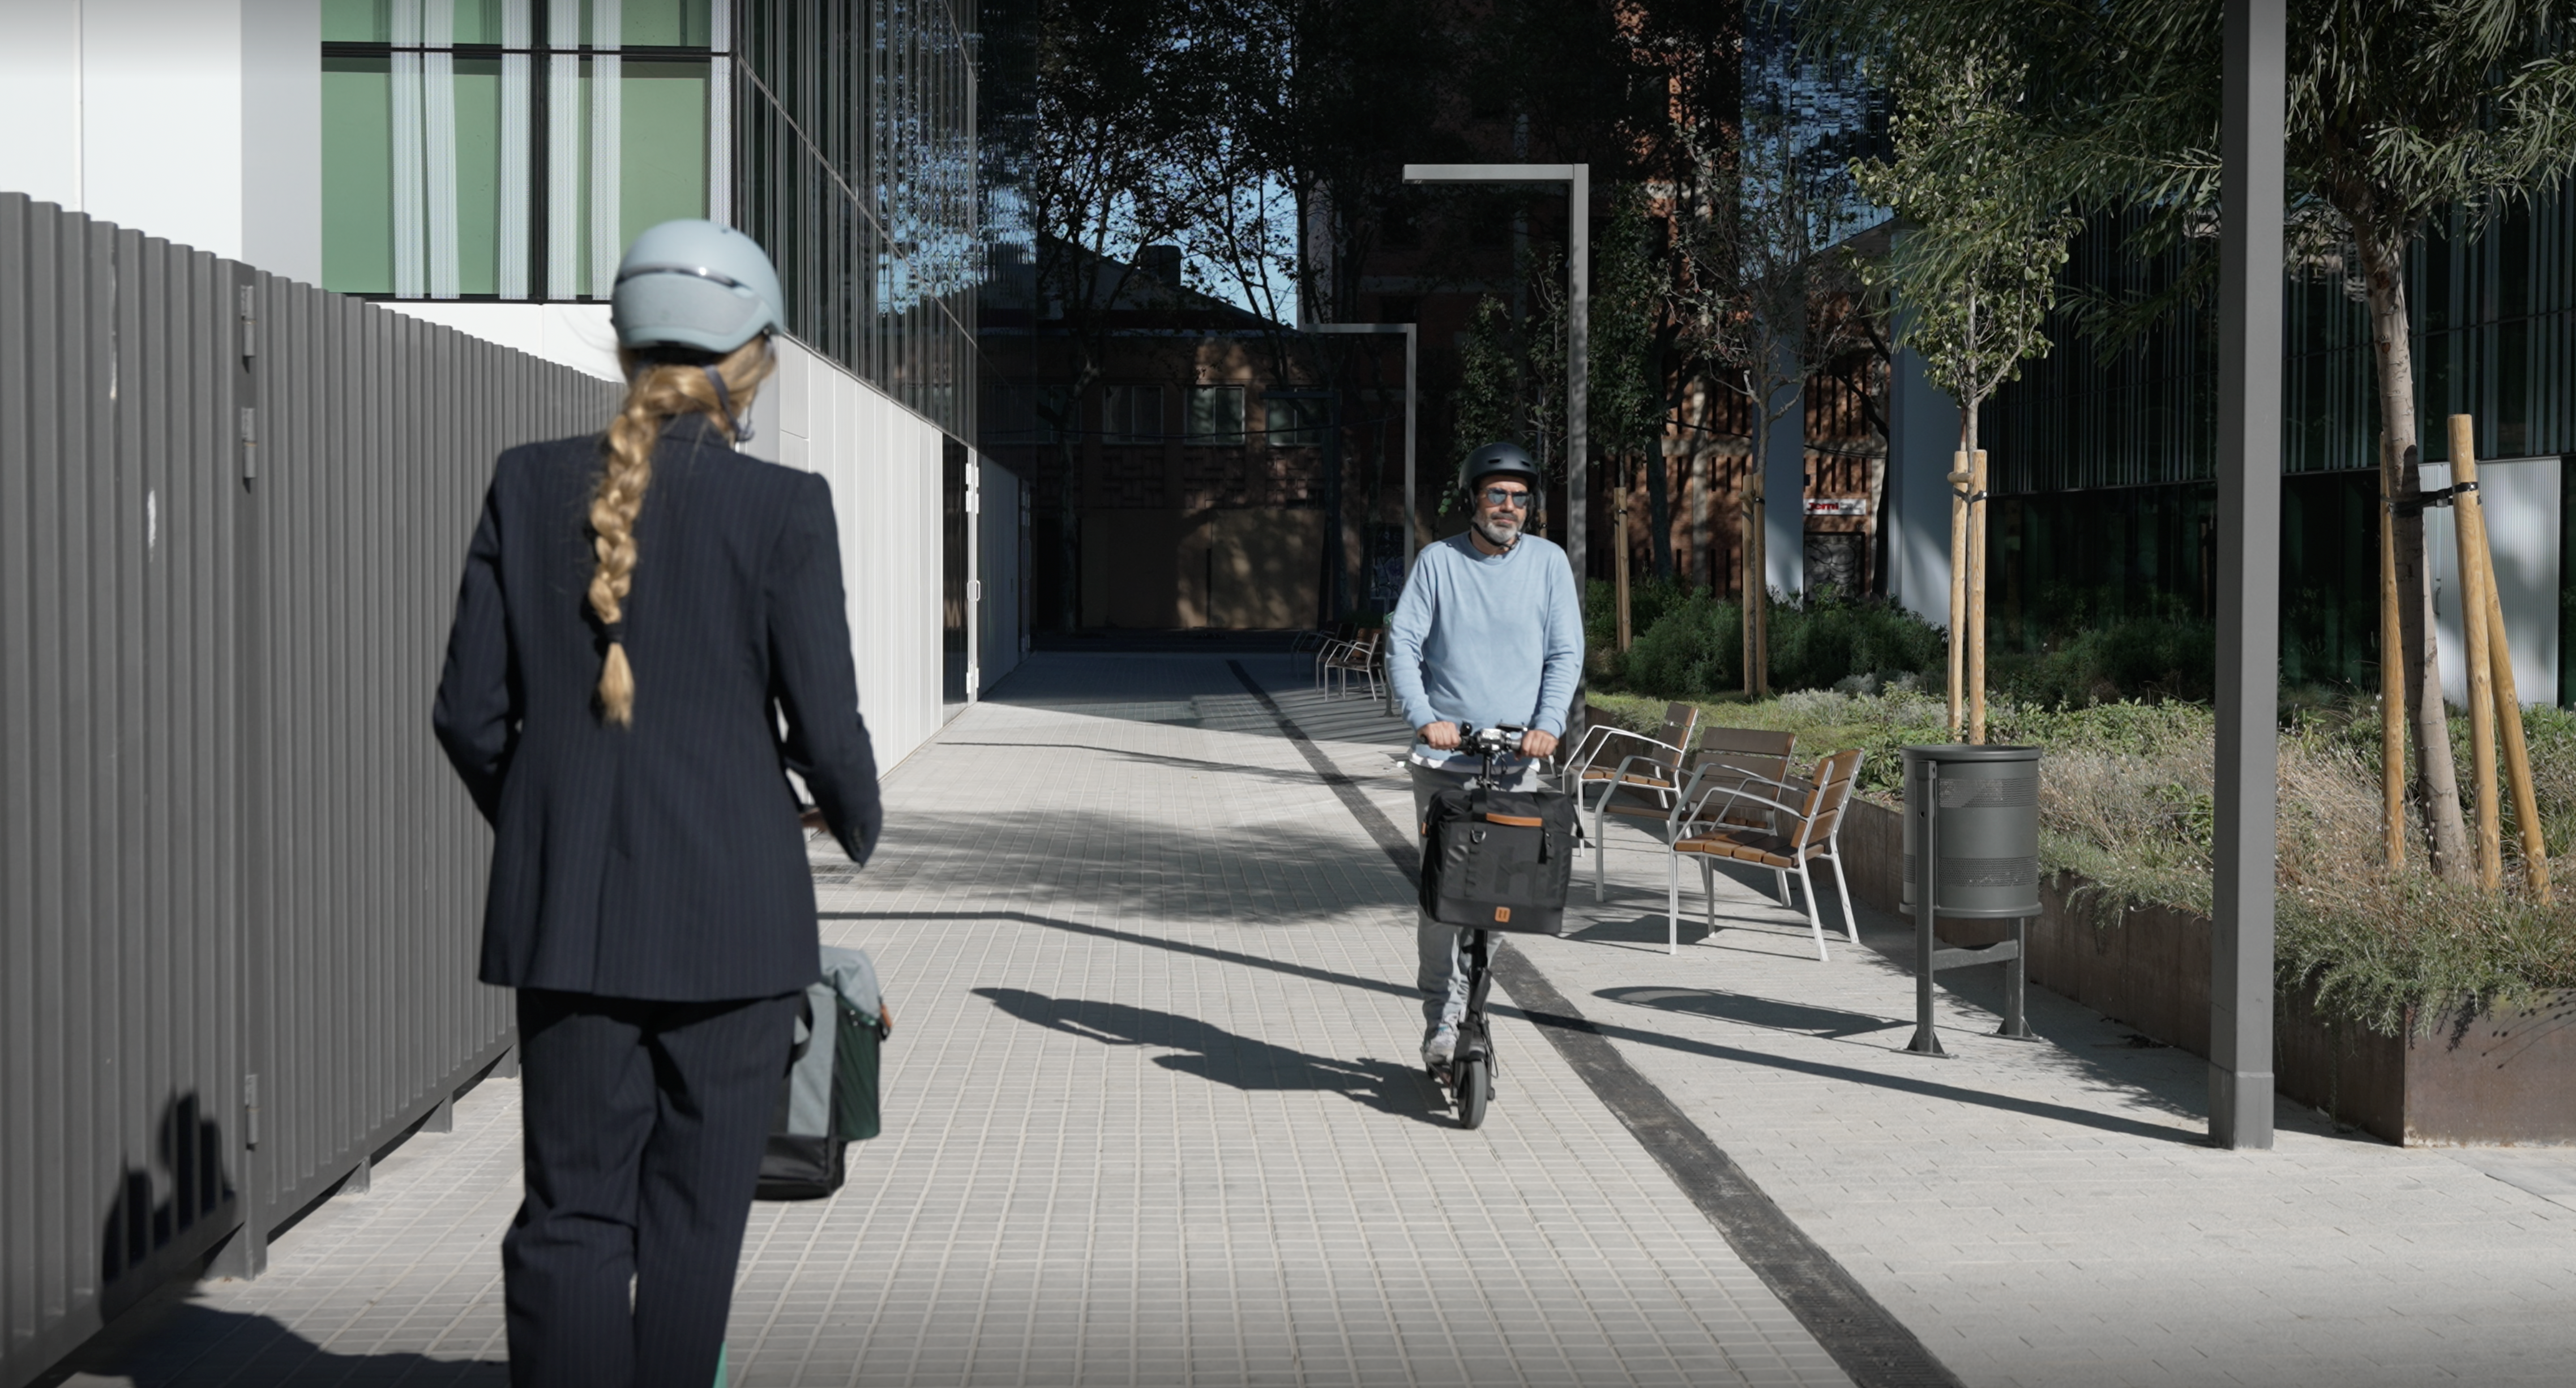 Two e-scooter users with the Öhll-in bag